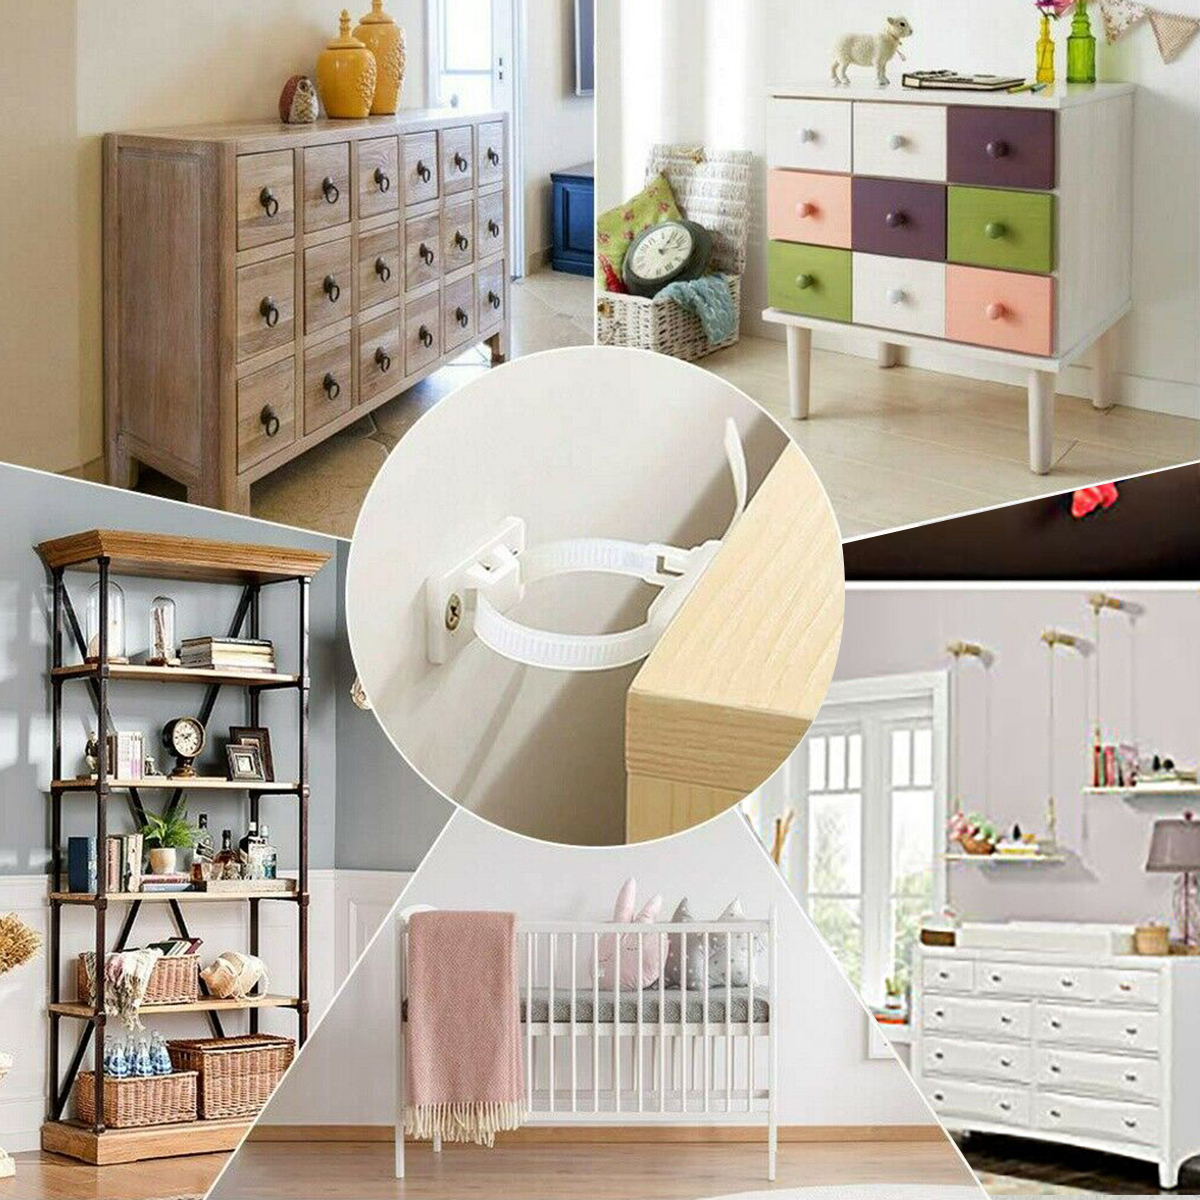 10Pcsset-Plastic-Furniture-Reverse-Buckle-For-Baby-Child-Proofing-Strap-Tip-Lock-1655063-7